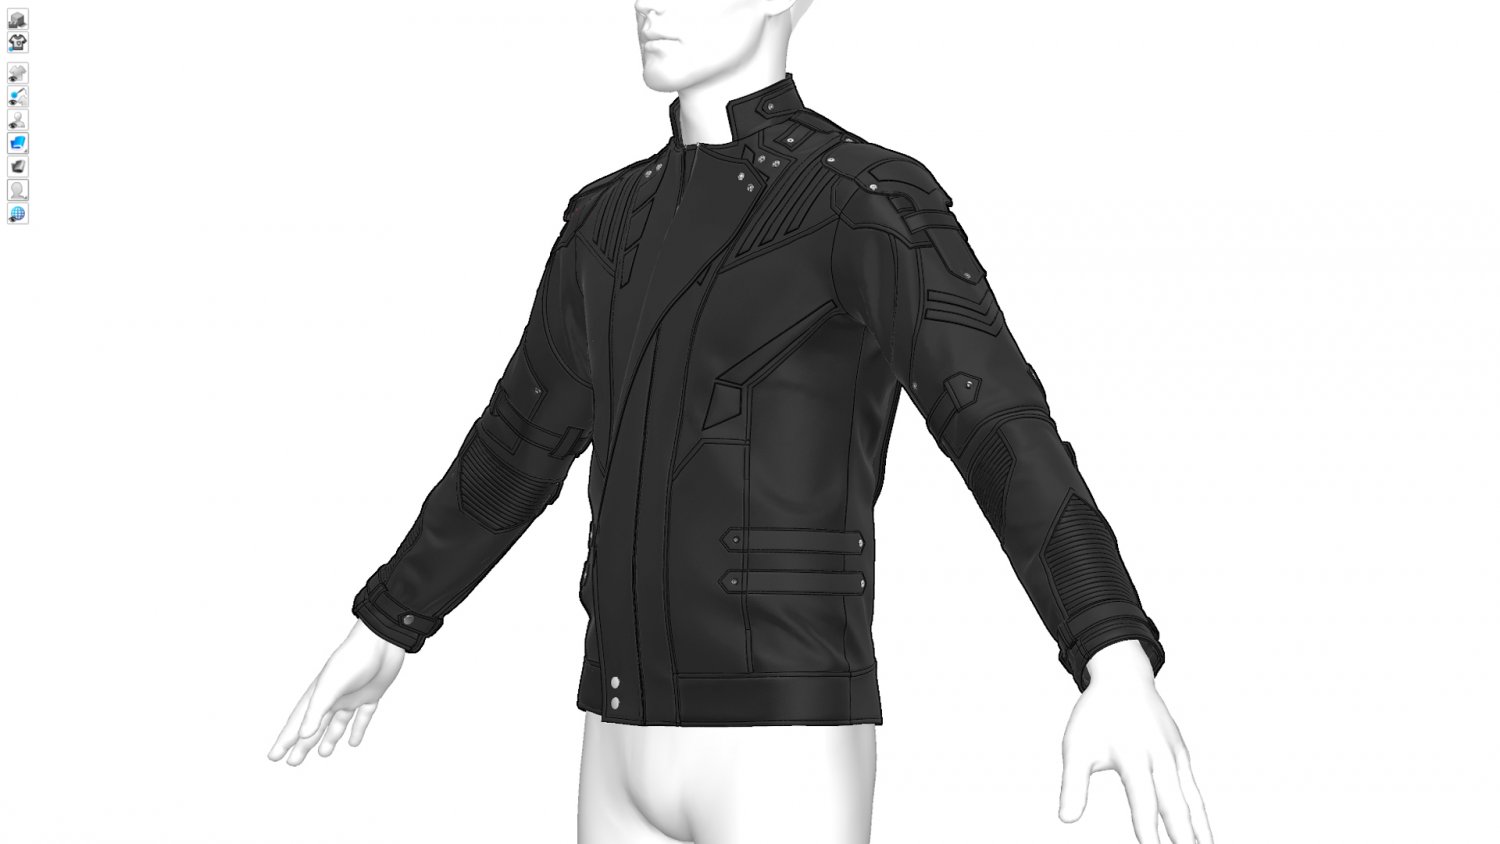 Making a Dress and a Leather Jacket in Marvelous Designer